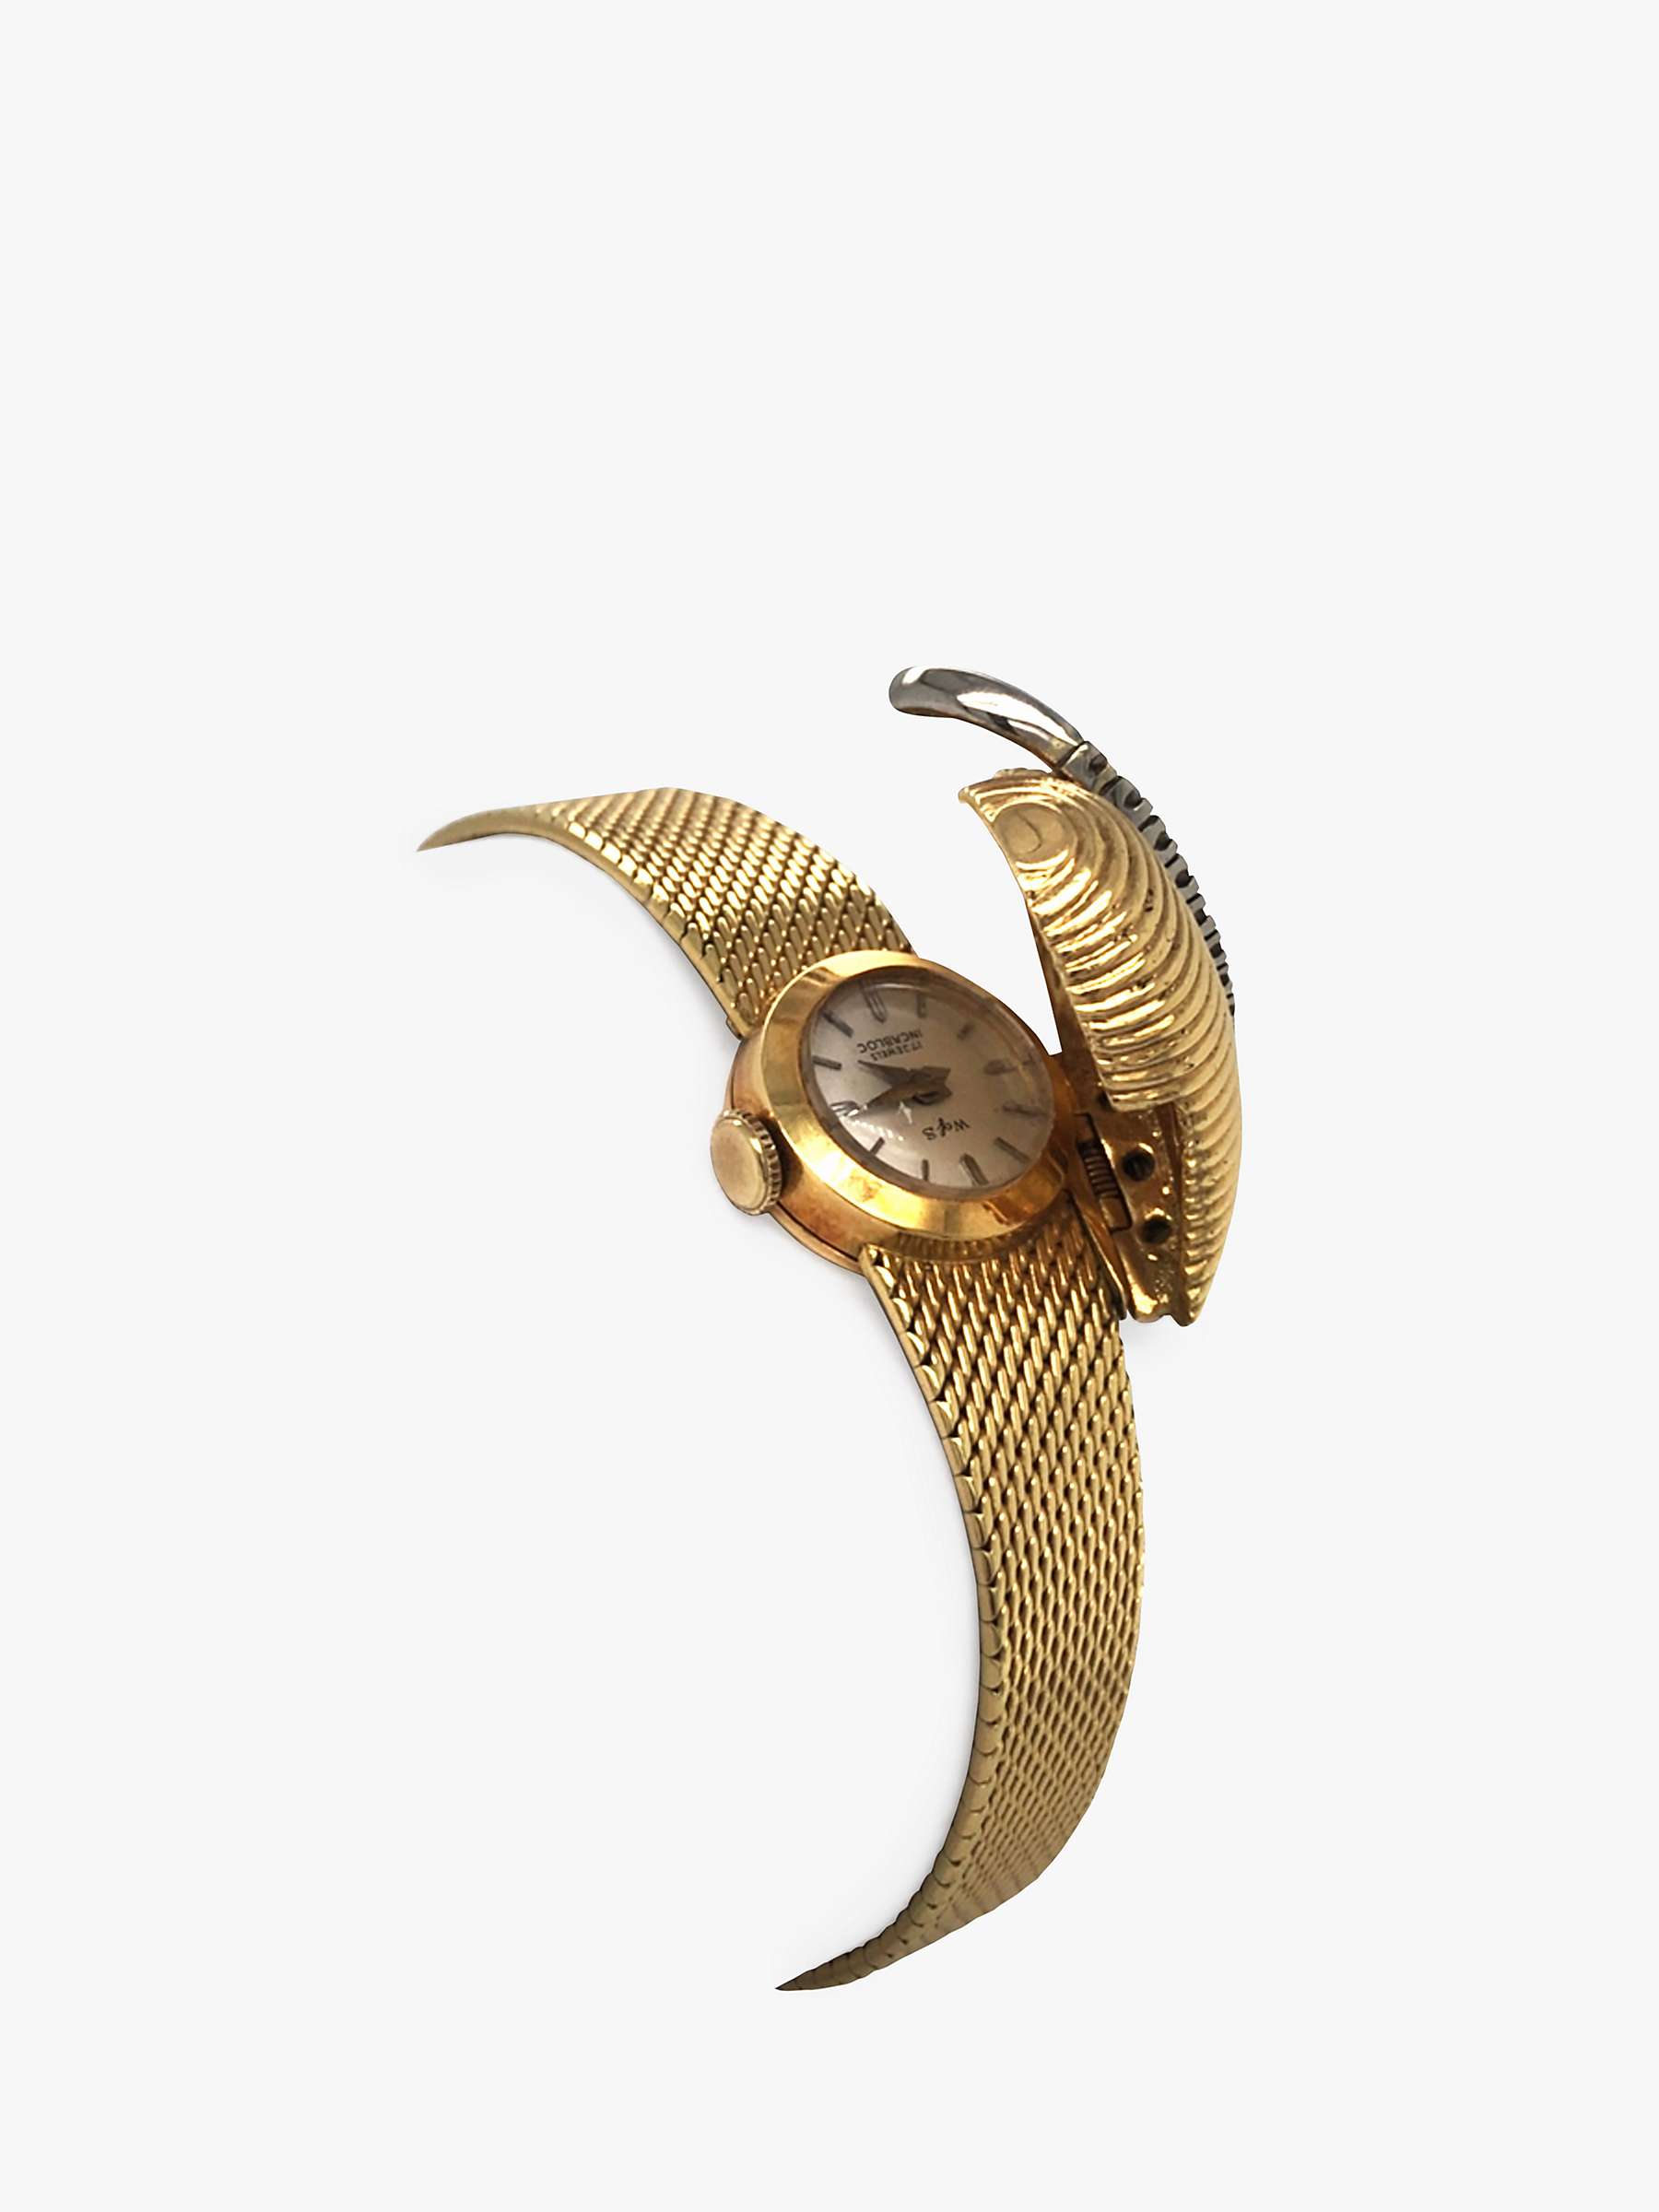 Buy Vintage Fine Jewellery Second Hand 18ct Yellow Gold Diamond Leaf Wrist Watch, Dated London 1960 Online at johnlewis.com